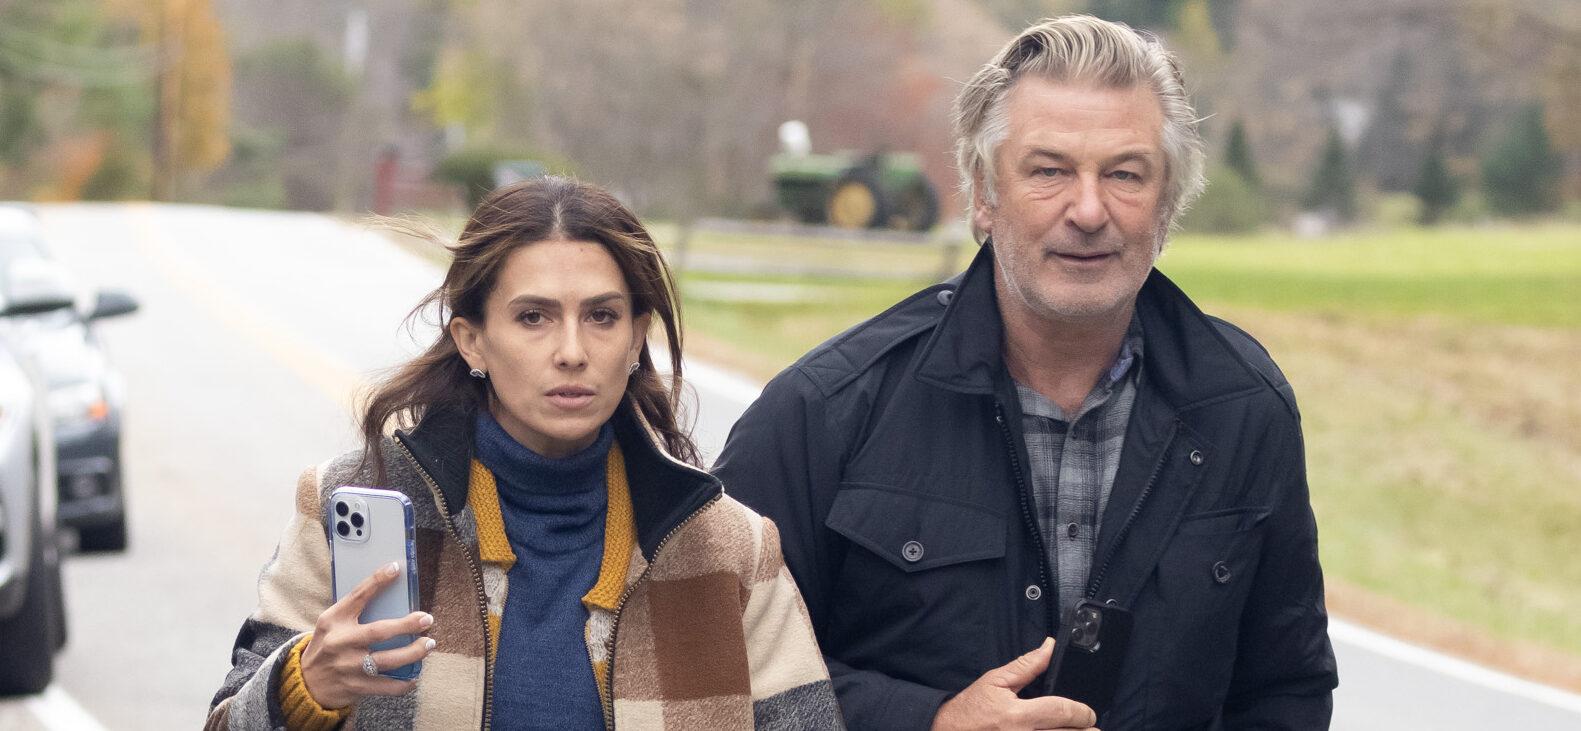 Alec Baldwin and Wife Hilaria Baldwin Find New ‘Rust’ Charges ‘Stressful’ and ‘Frustrating’